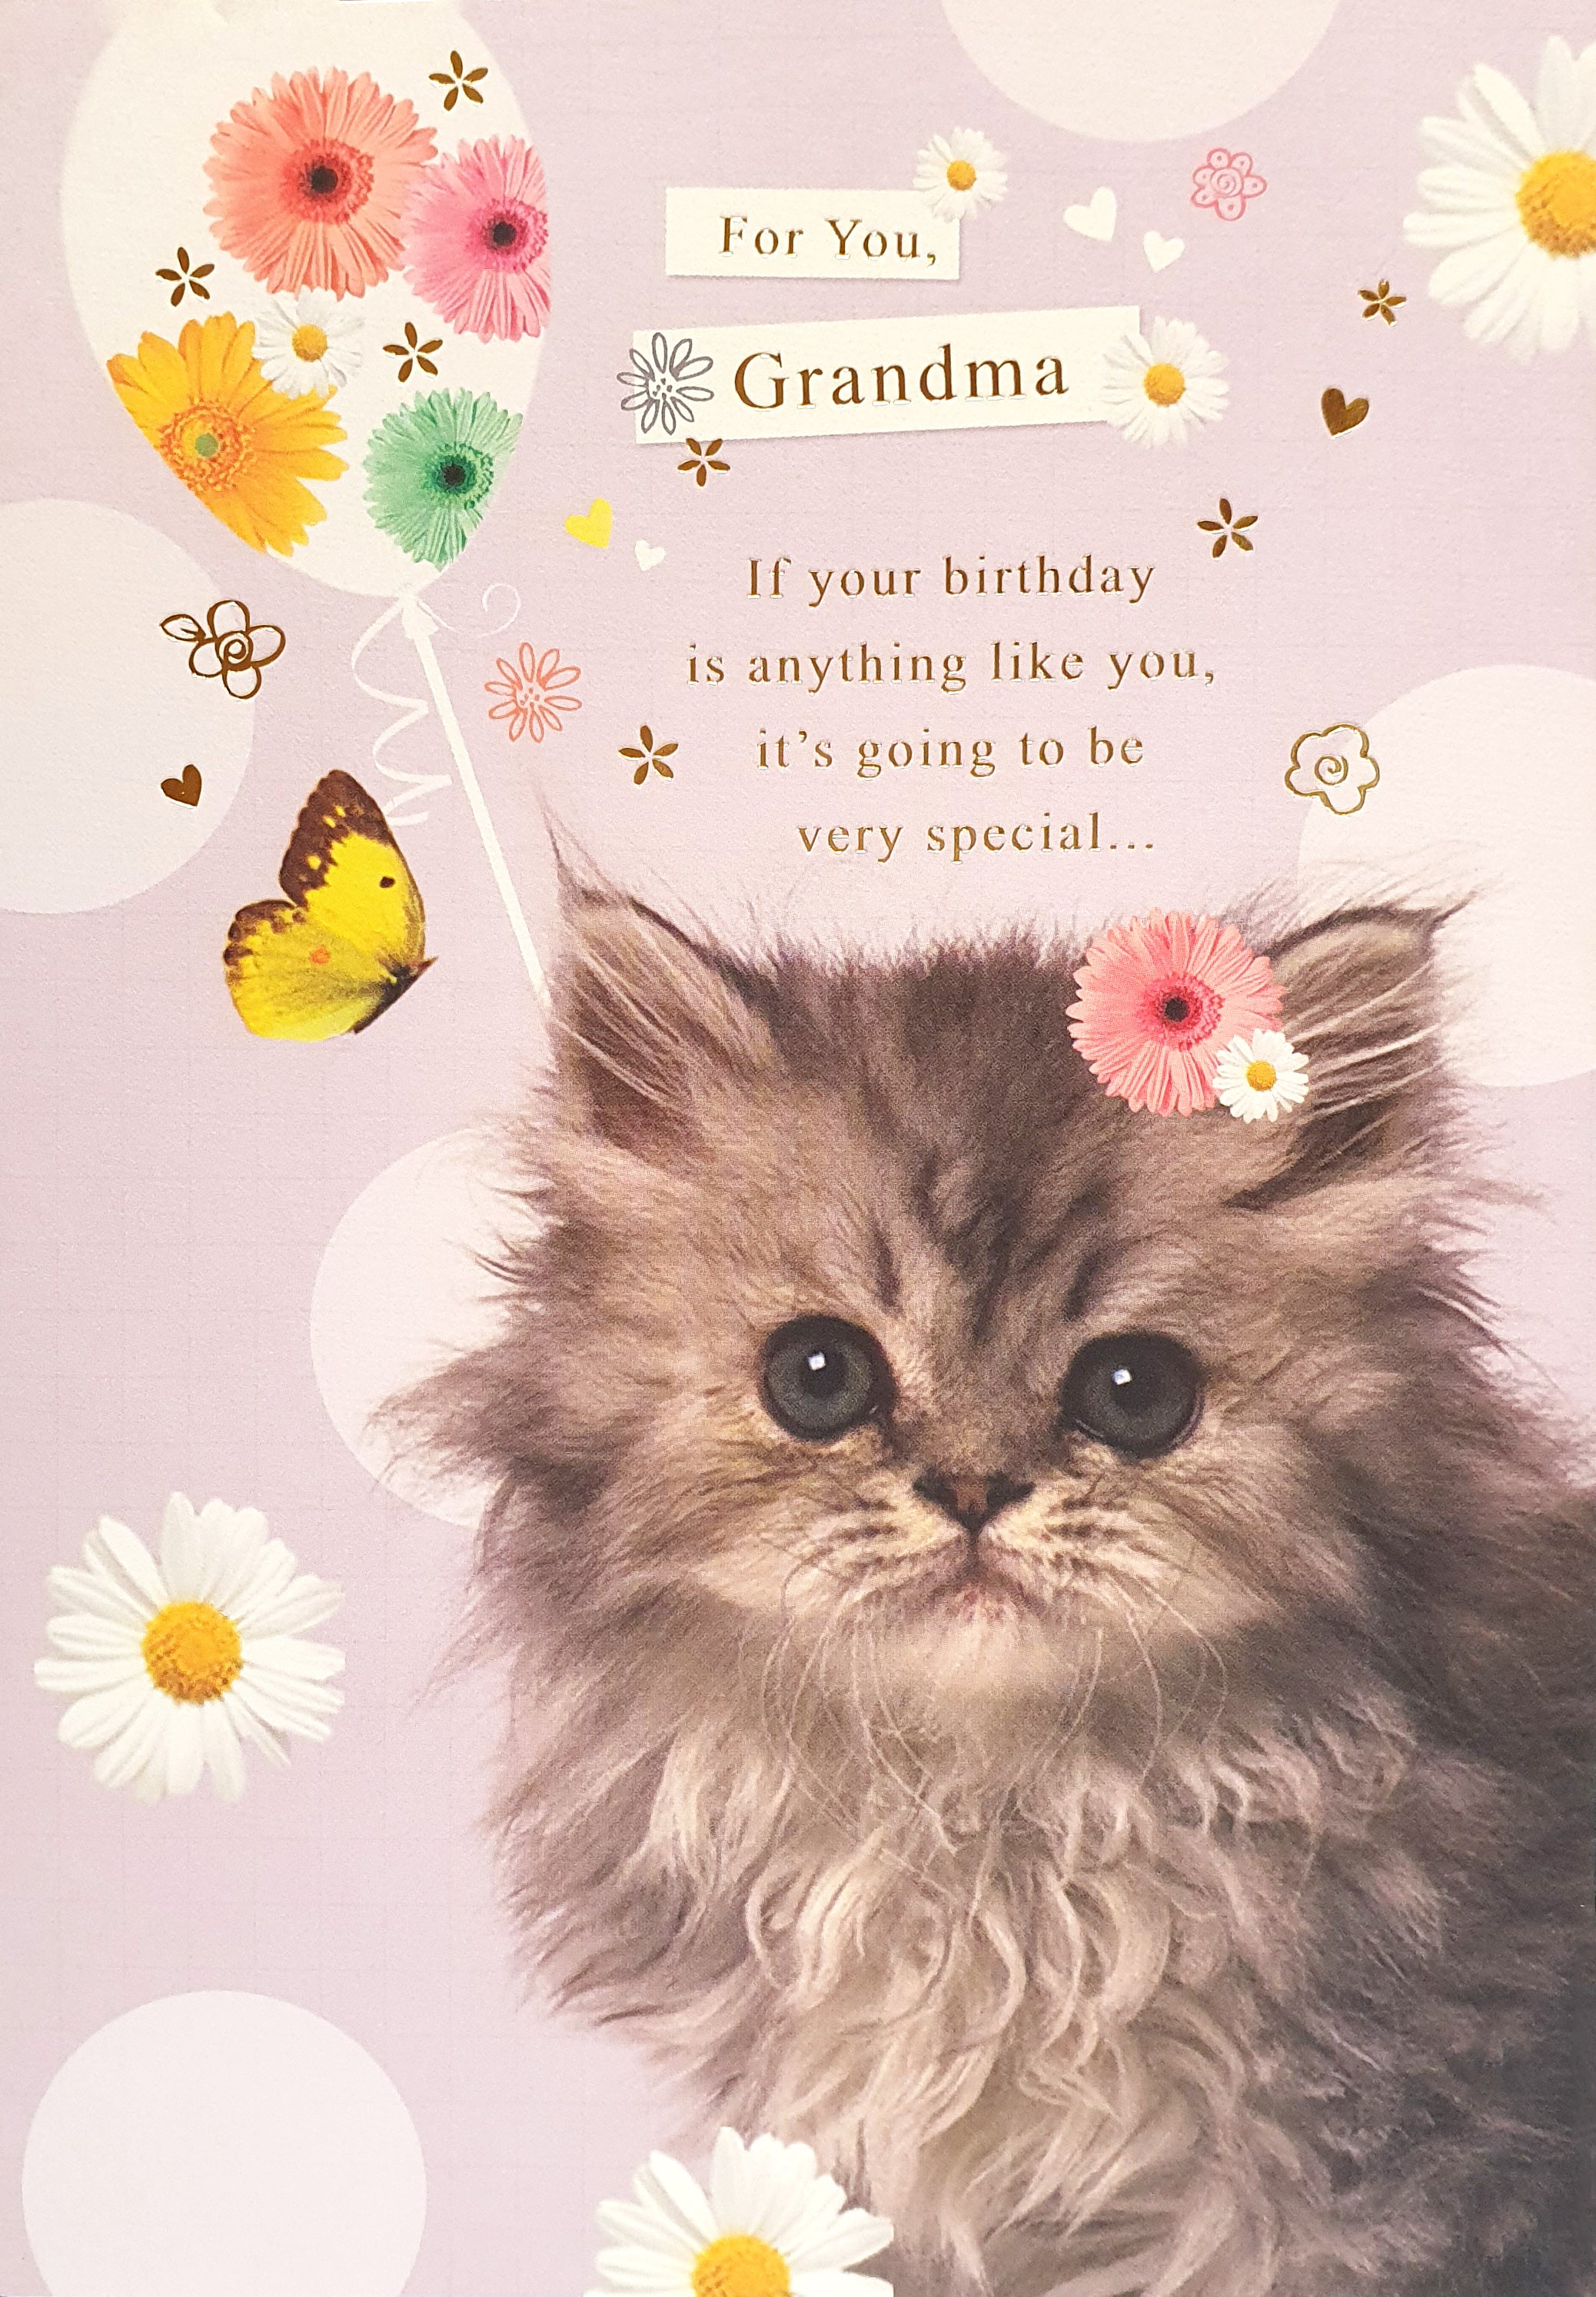 Grandma Birthday Card - Whiskers and Wishes